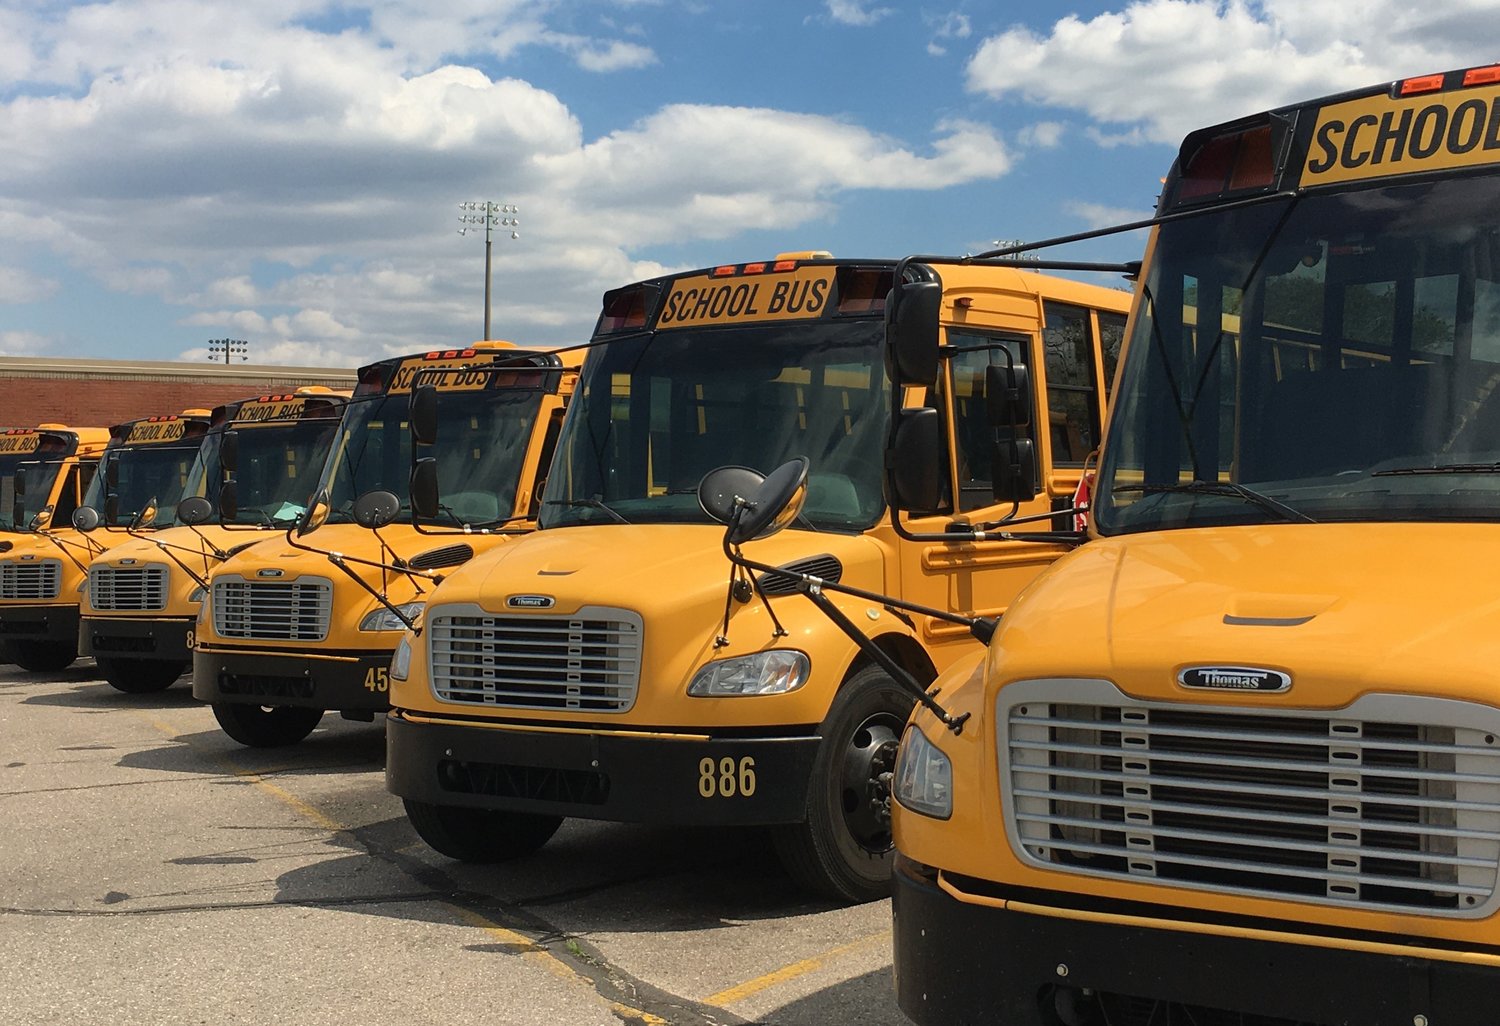 Cumberland County's Board of Education will consider funding for a 'community engagement' bus o share academic-related information with families at the neighborhood level.